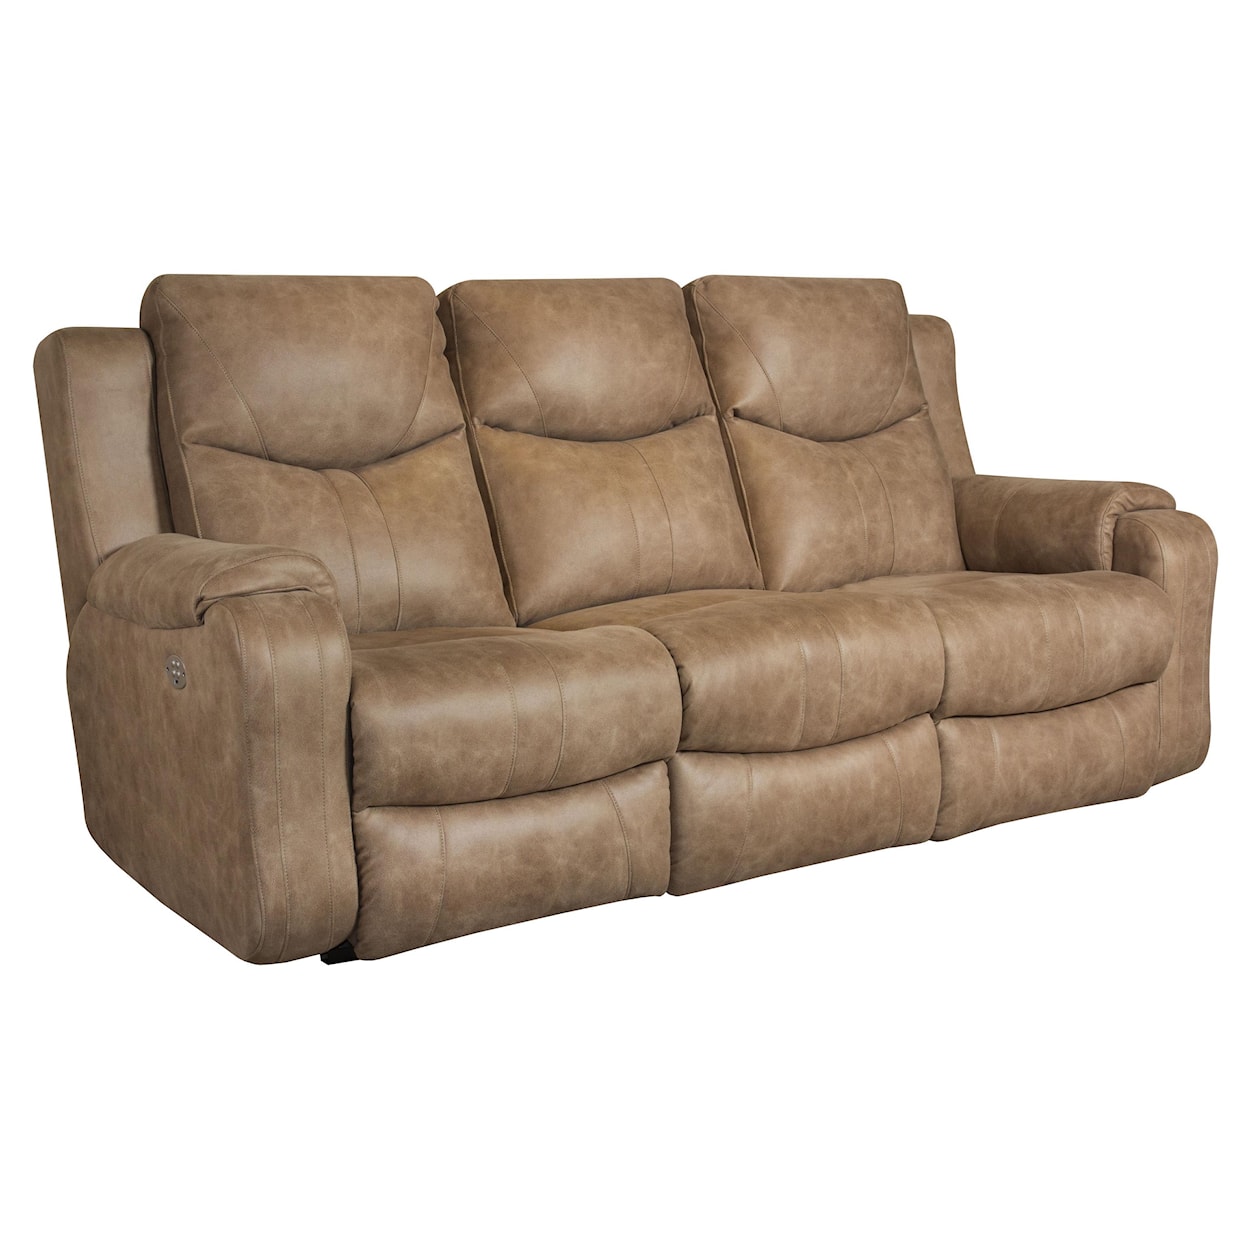 Southern Motion Marvel Double Reclining Sofa